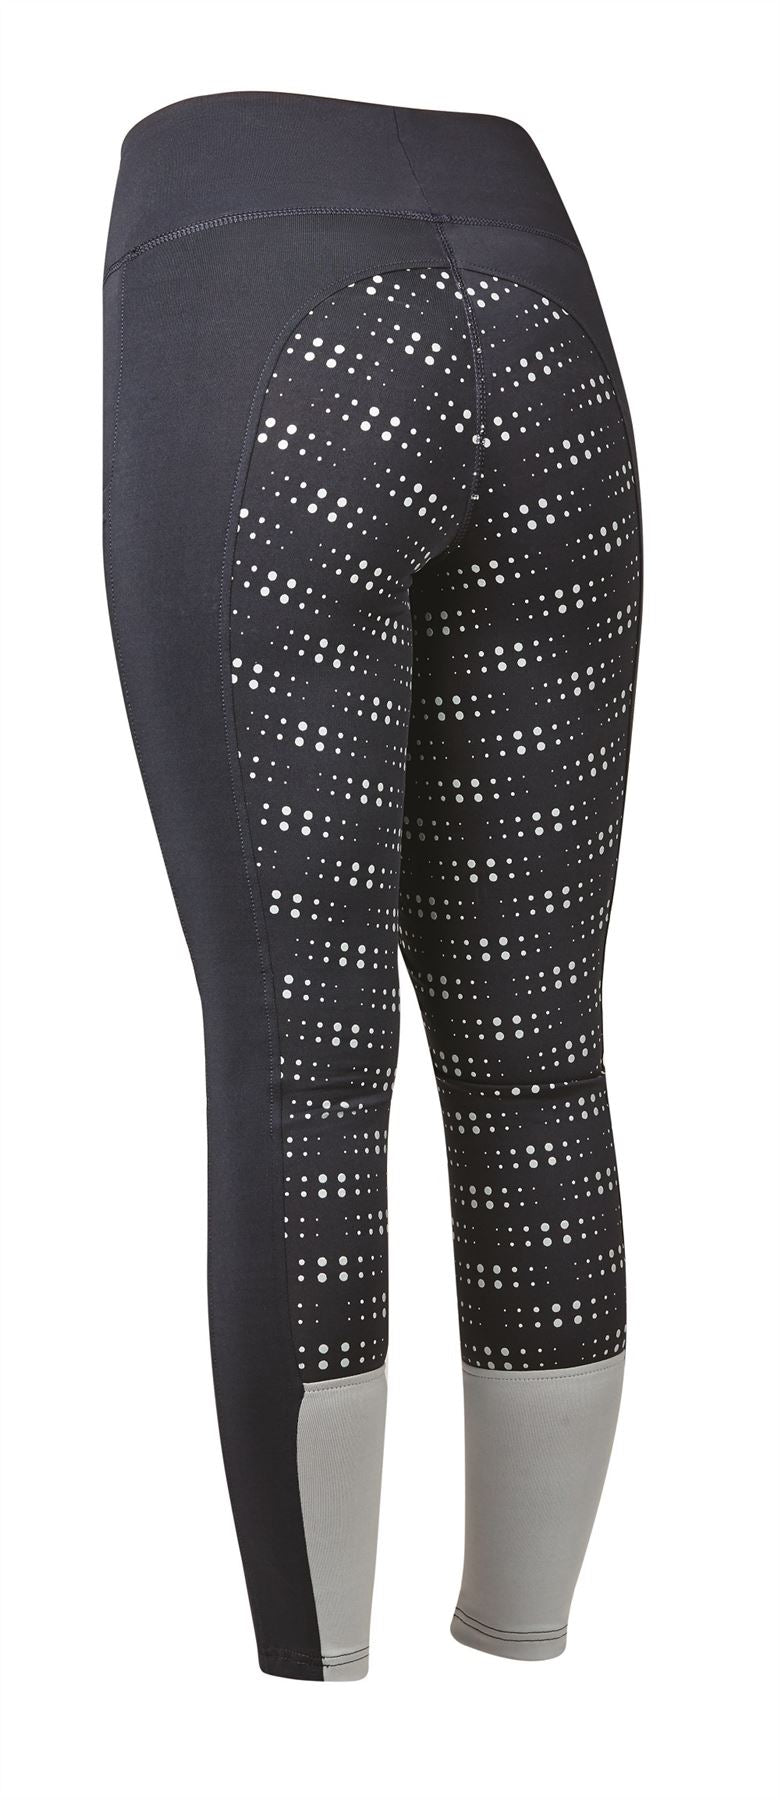 Dublin Performance Cool-It Dot Print Gel Riding Tights - Just Horse Riders